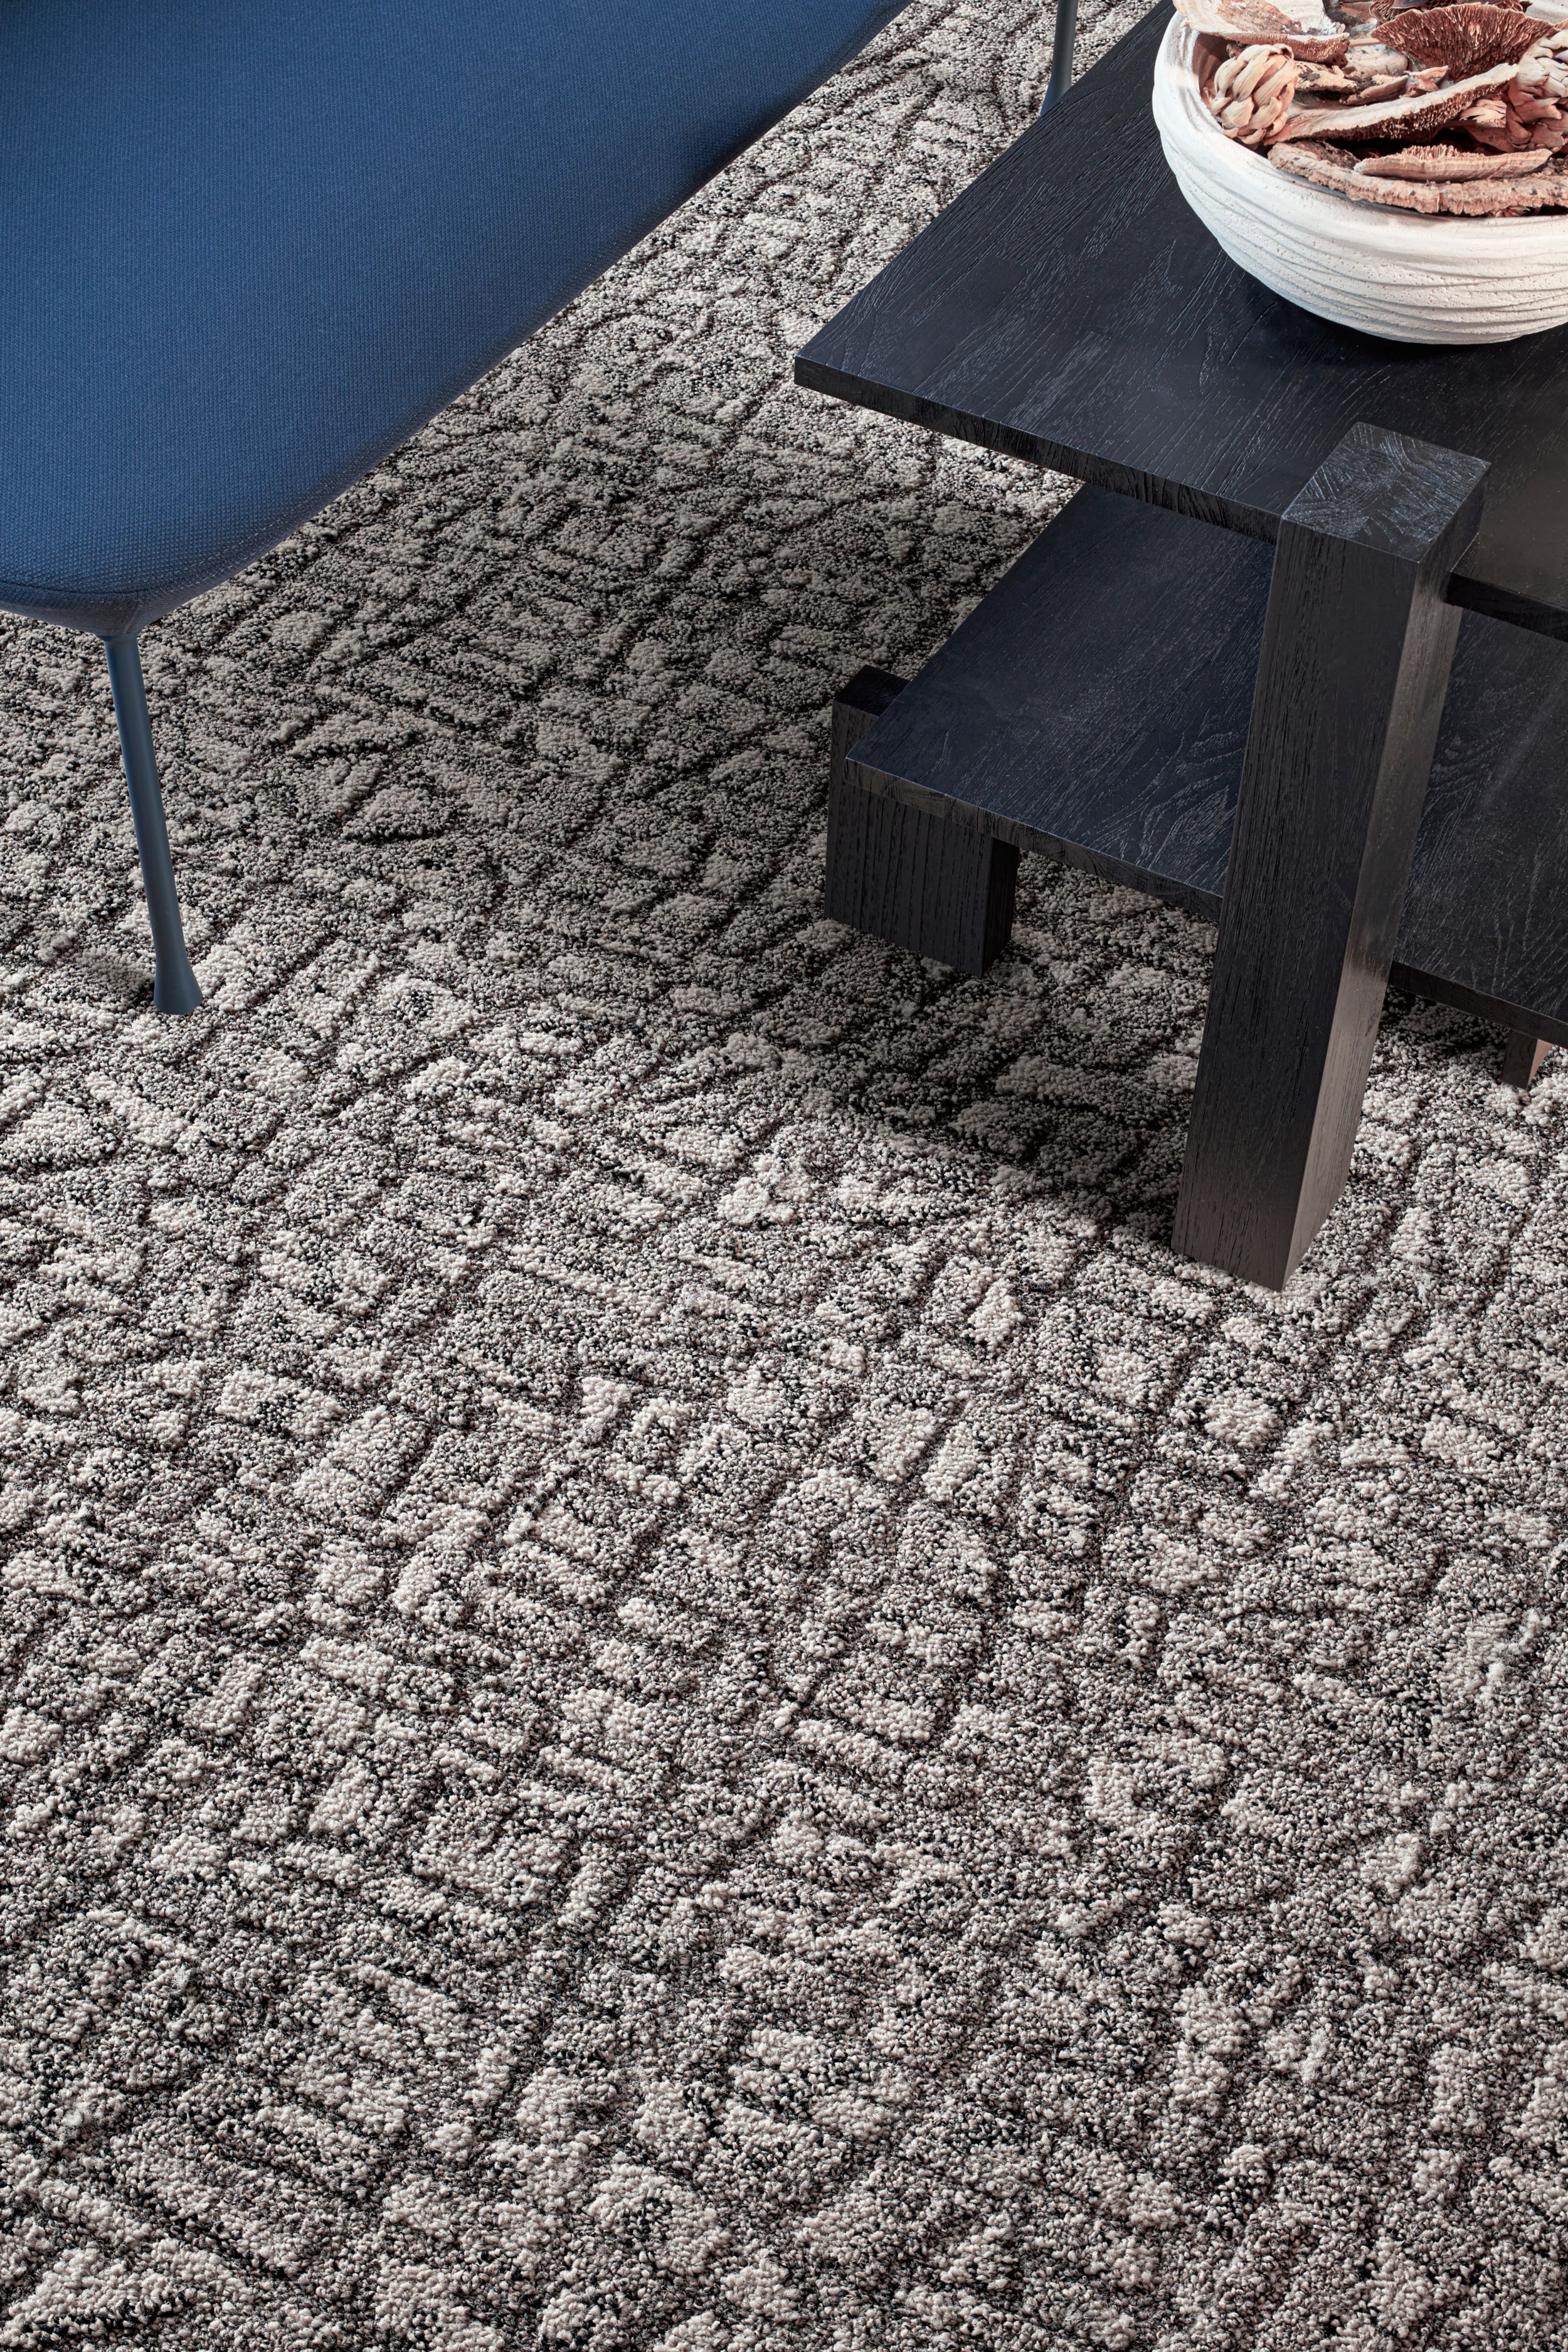 Interface E610 carpet tile in lobby with blue bench and dark wood table Bildnummer 3